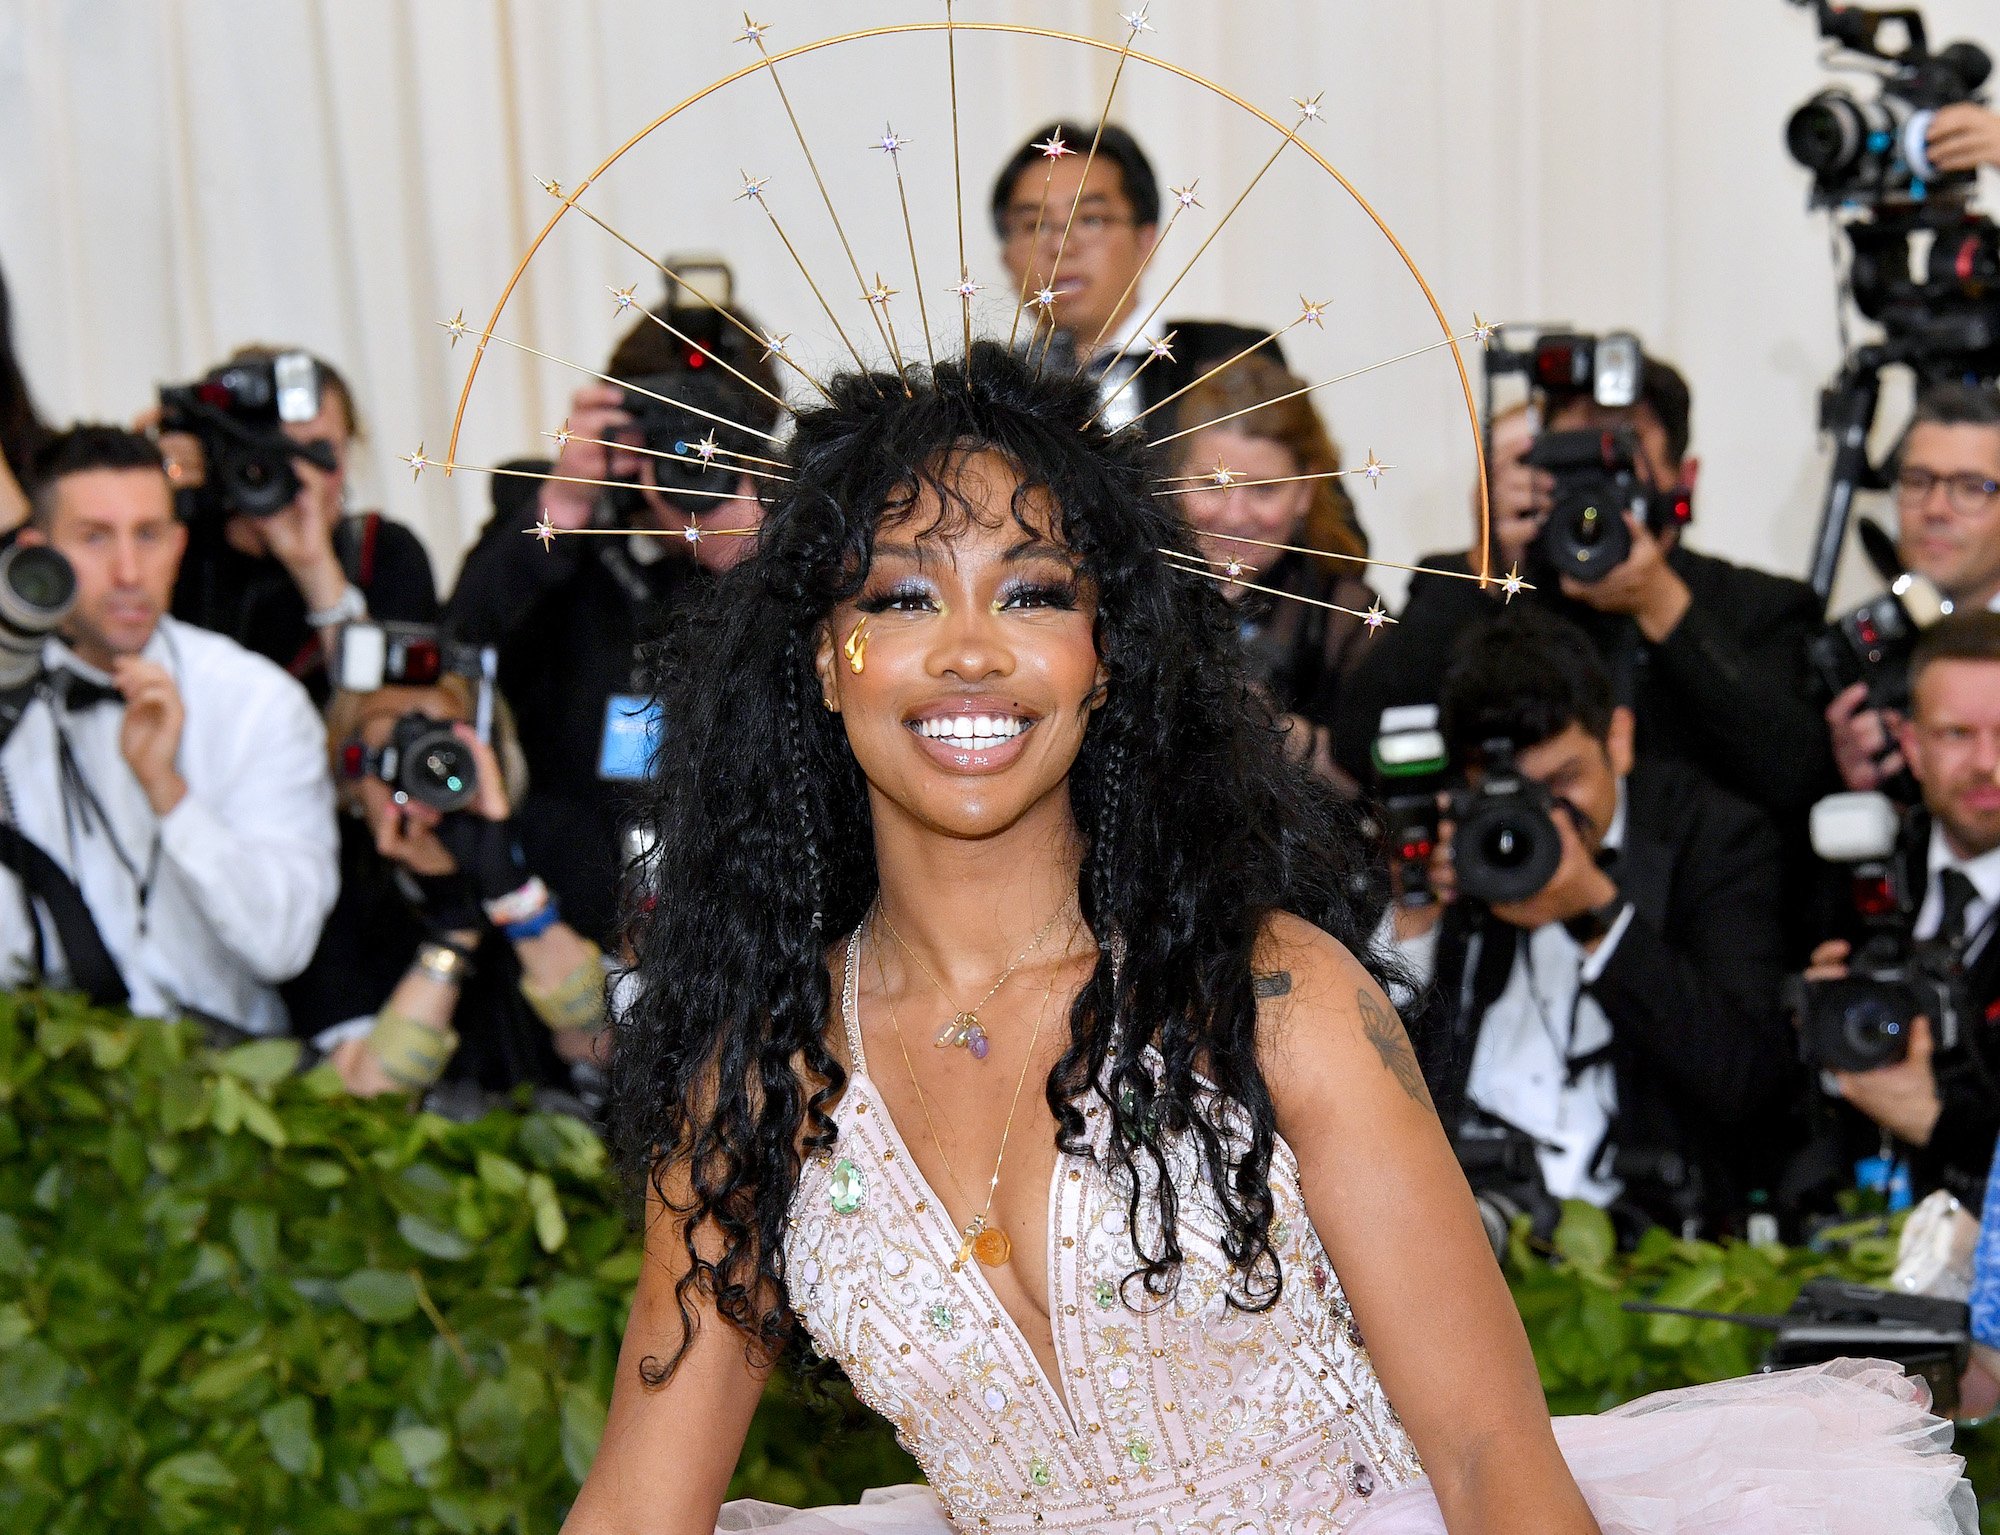 SZA smiling in front of a crowd of photographers